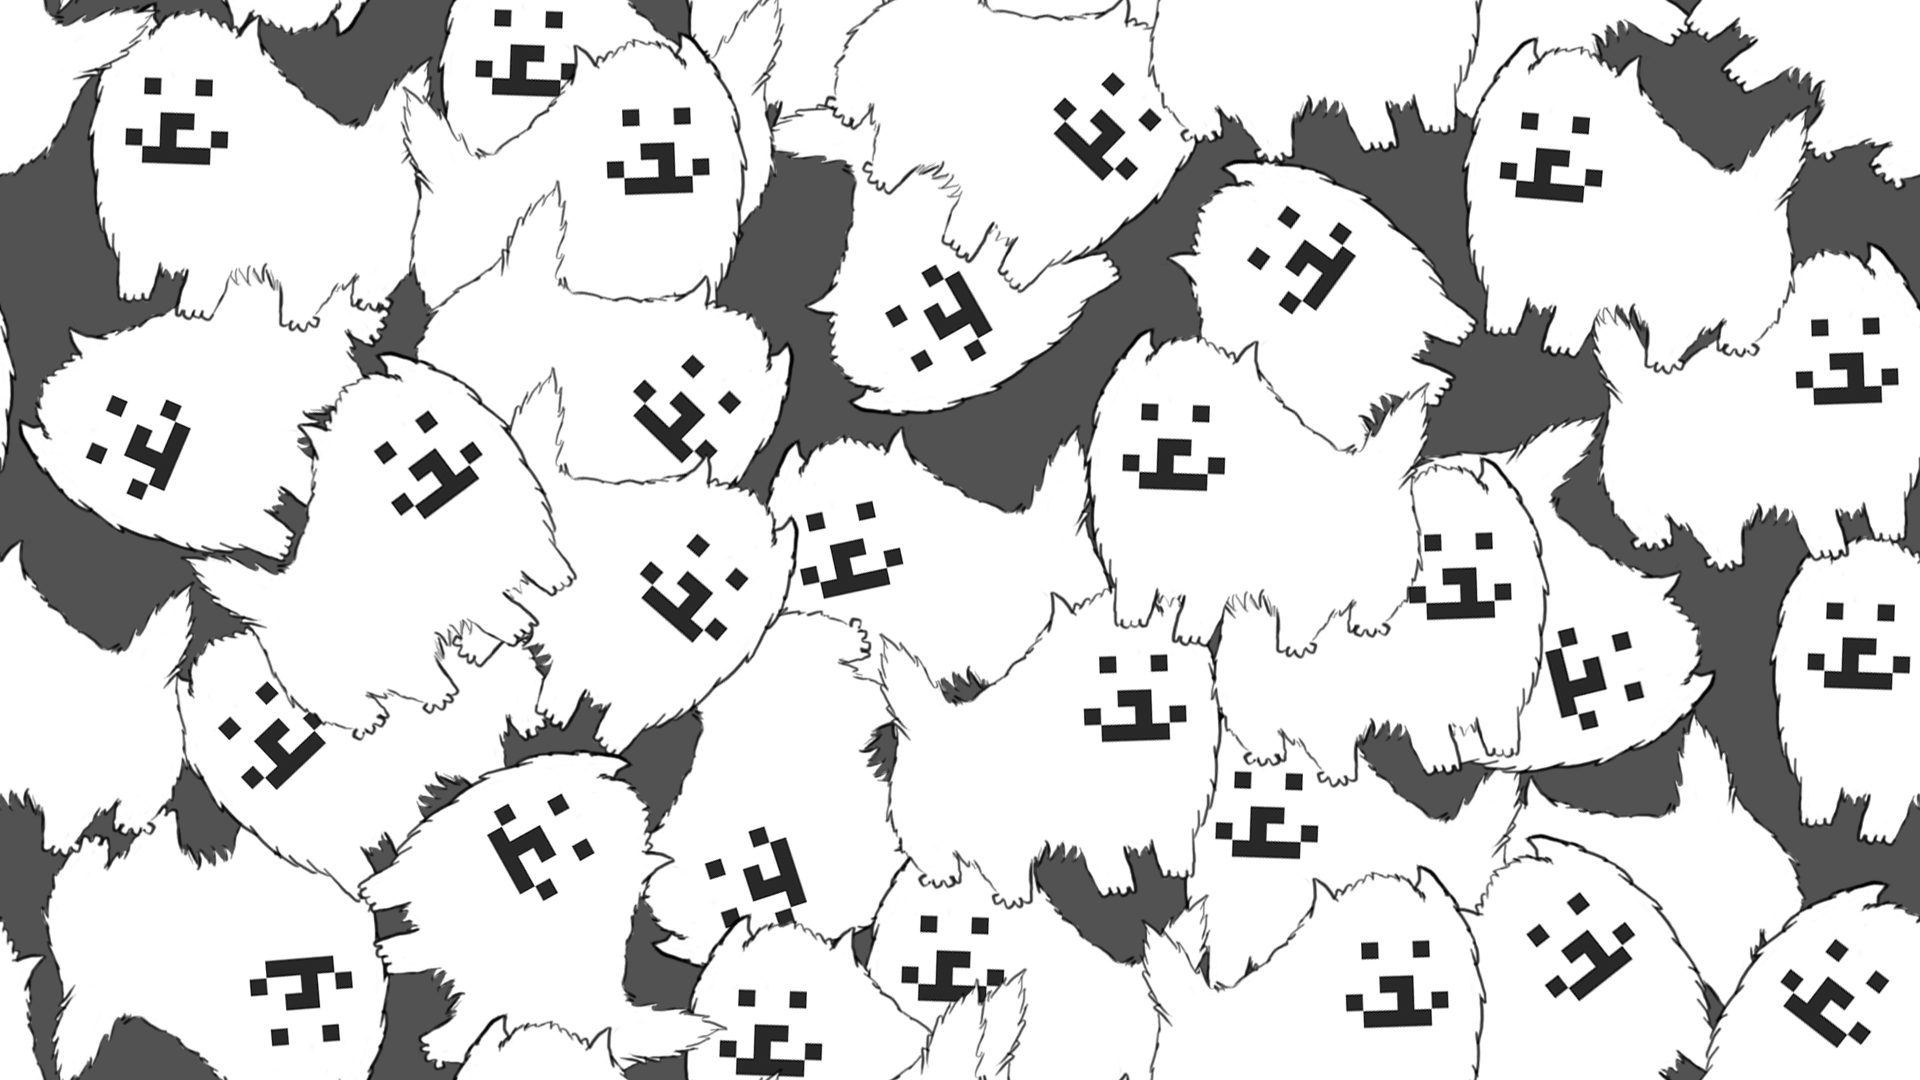 Tile-able Dog Wallpaper I Made - Annoying Dog Undertale Background , HD Wallpaper & Backgrounds